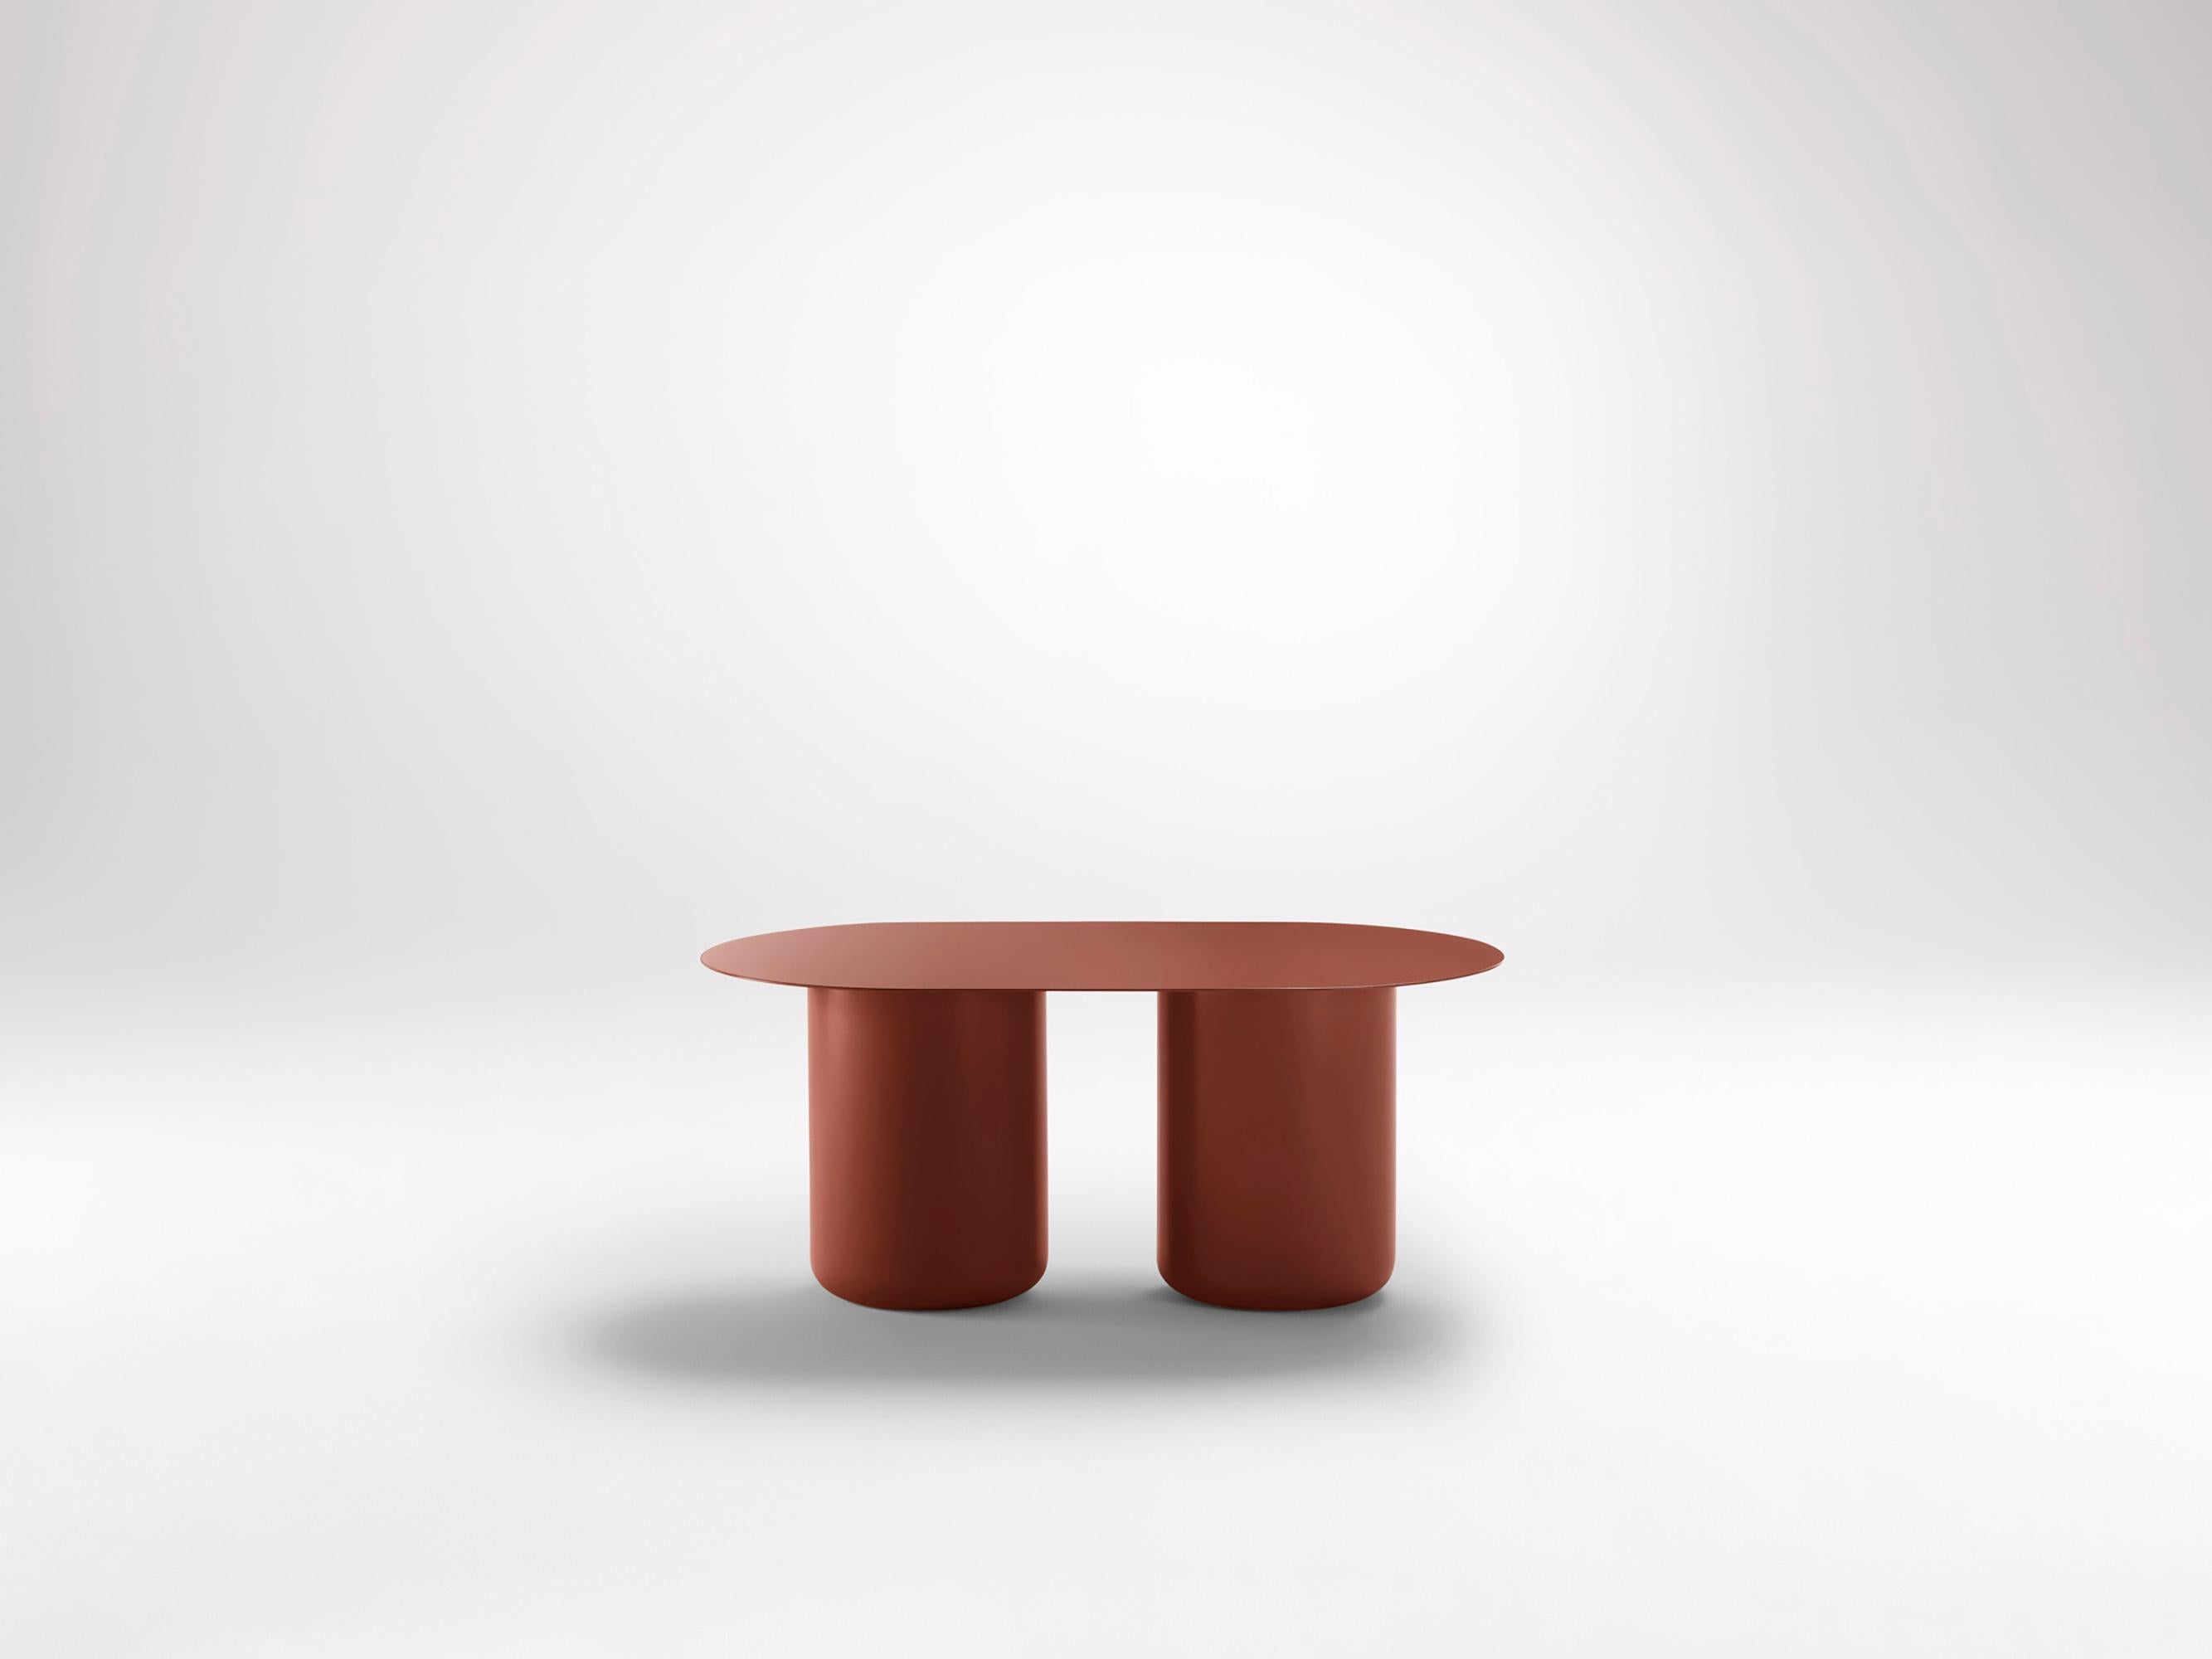 Headland Red Table 02 by Coco Flip
Dimensions: D 48 / 85 x H 32 / 36 / 40 / 42 cm
Materials: Mild steel, powder-coated with zinc undercoat. 
Weight: 20 kg

Coco Flip is a Melbourne based furniture and lighting design studio, run by us, Kate Stokes